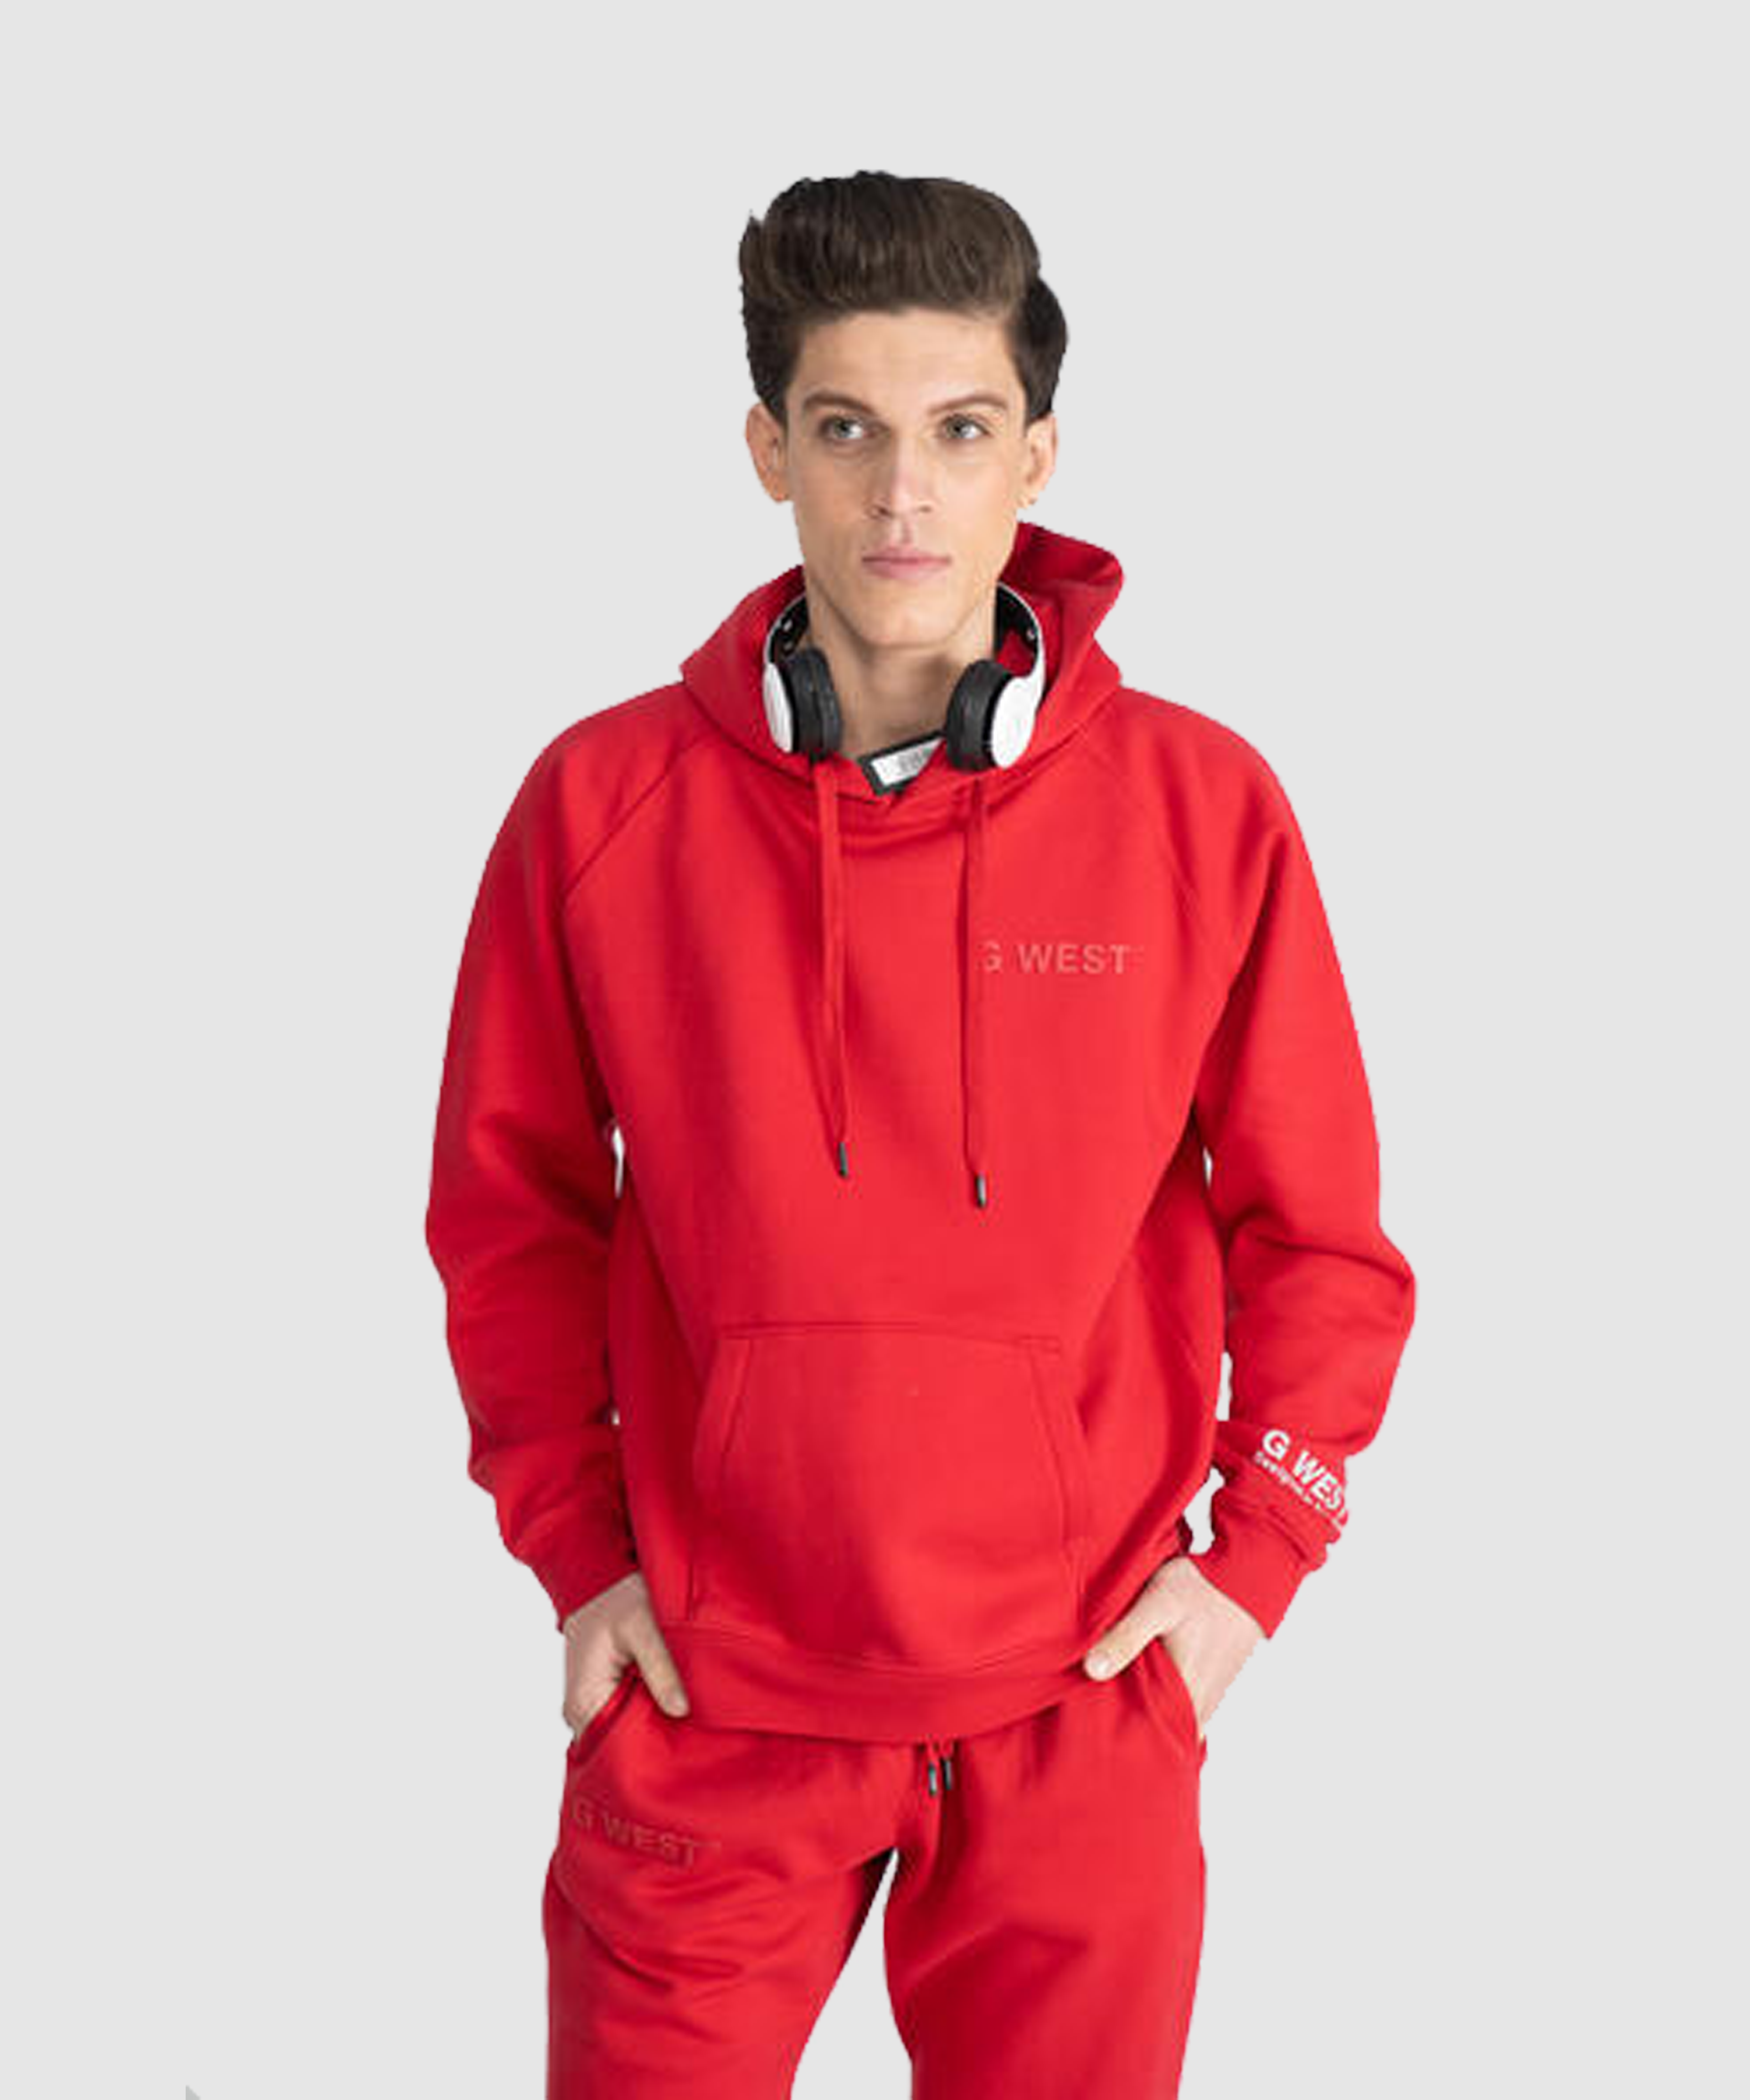 G WEST SMALL CHEST LOGO HOODIE MENS STYLE: GWLFHD6001 - 9 COLORS